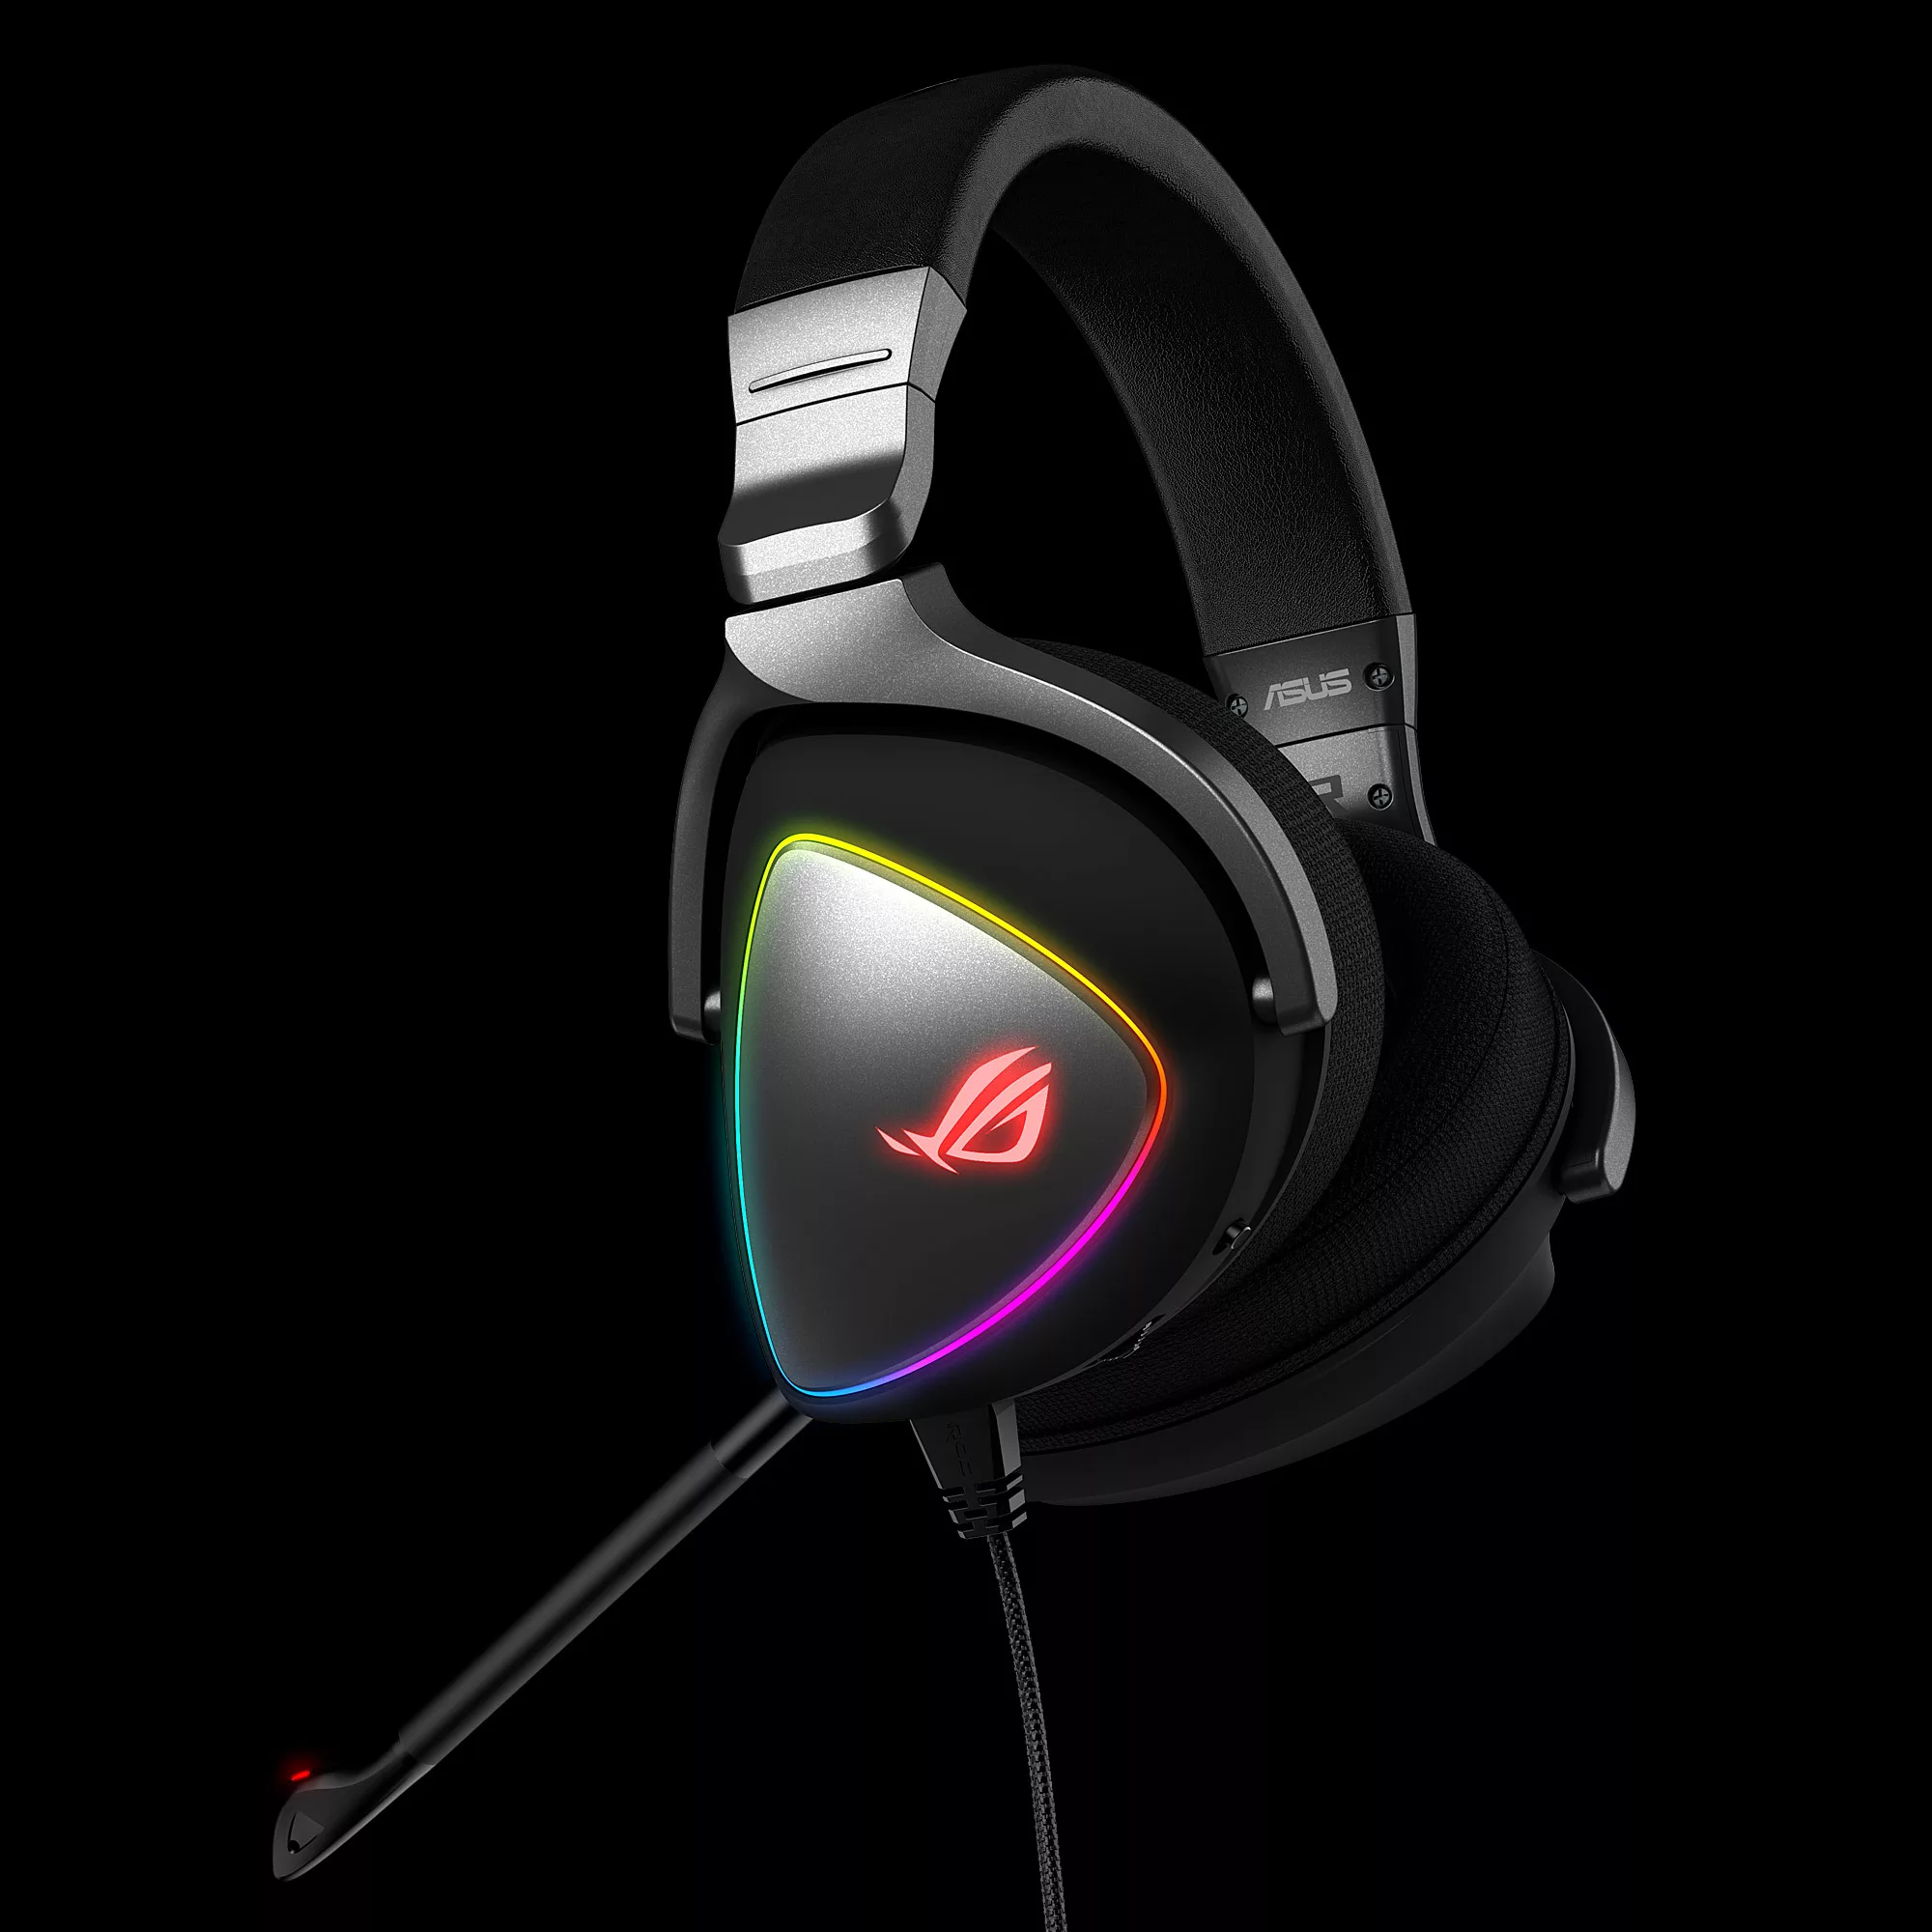 Enjoy digital audio bliss on PC and mobile with the ROG Delta Type-C headset  | ROG - Republic of Gamers Global